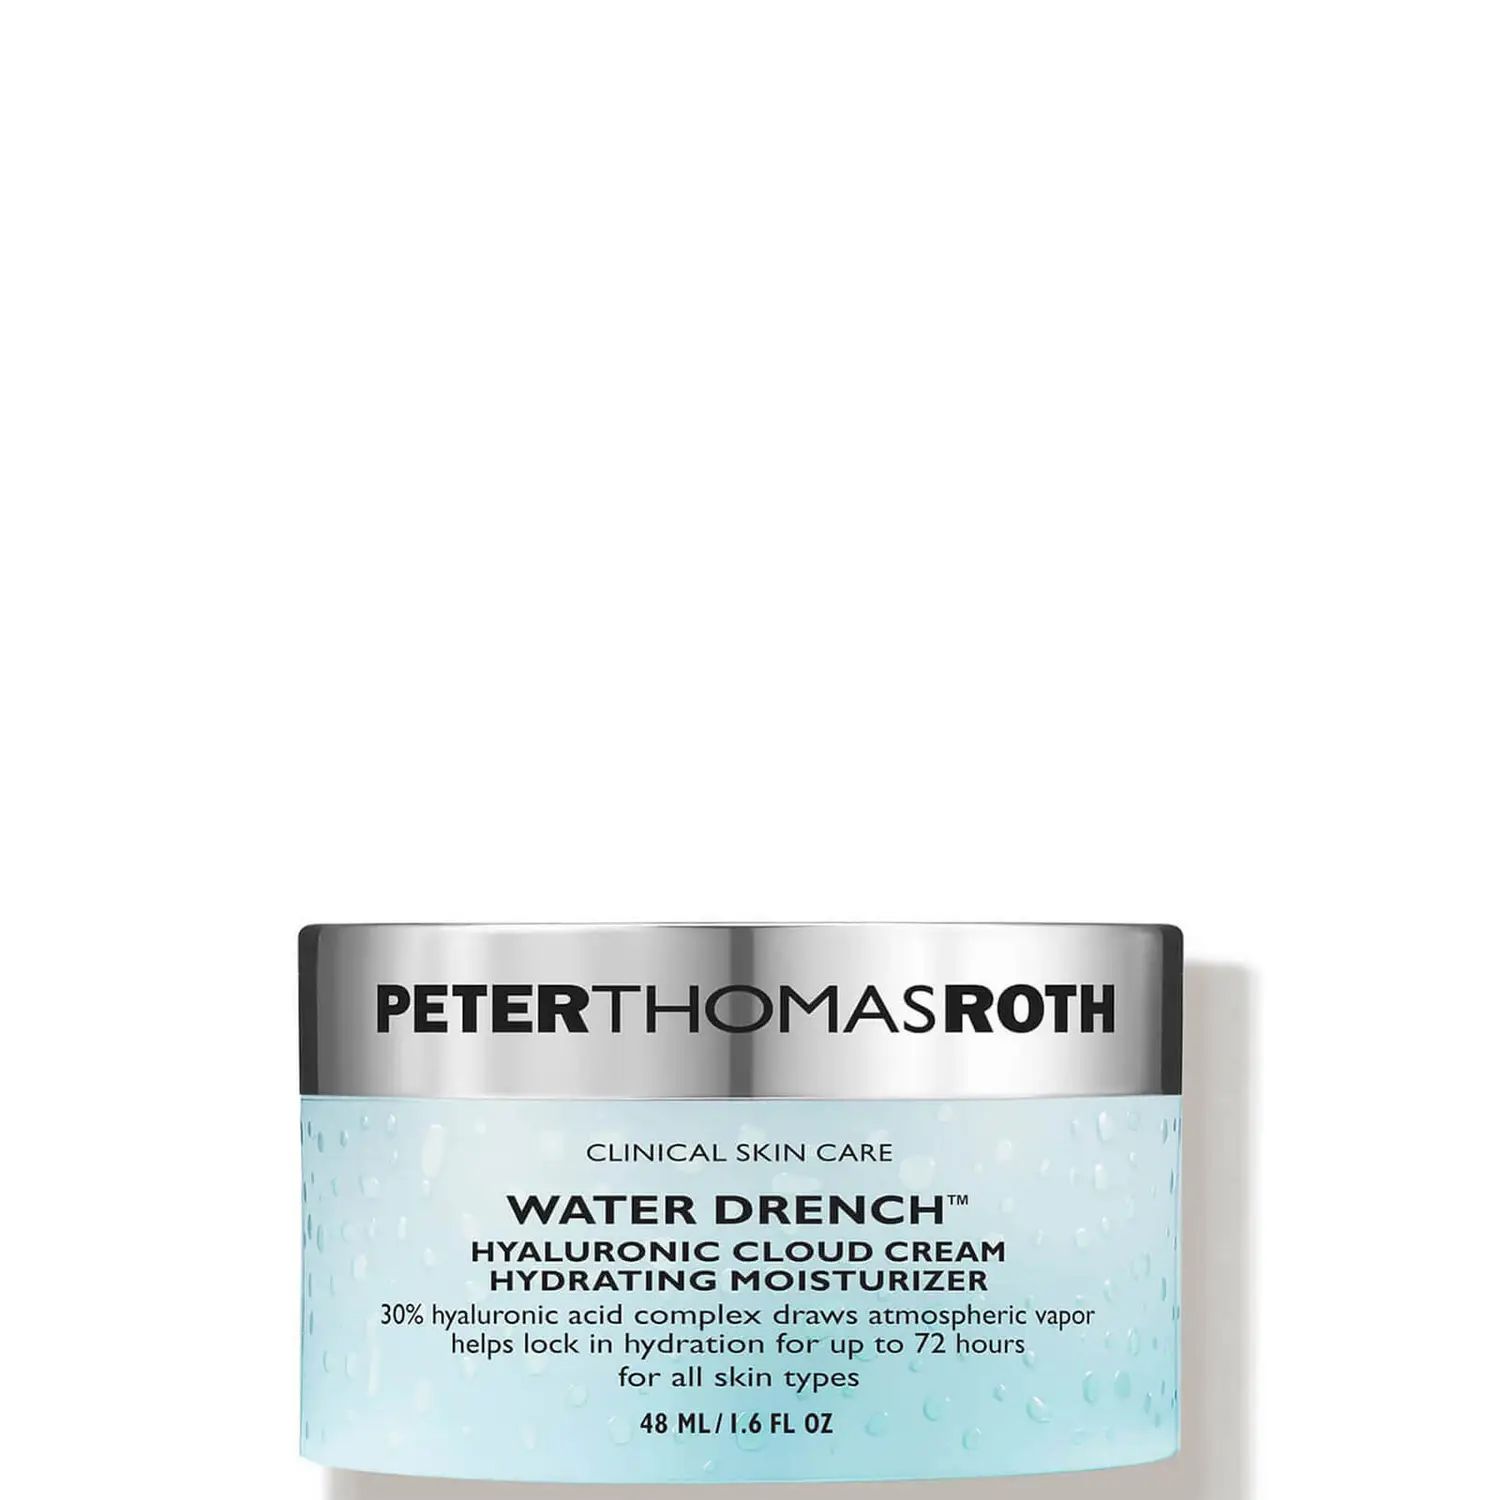 Peter Thomas Roth Water Drench Hyaluronic Cloud Cream Hydrating Moisturizer (1.6 oz.) | Dermstore (US)